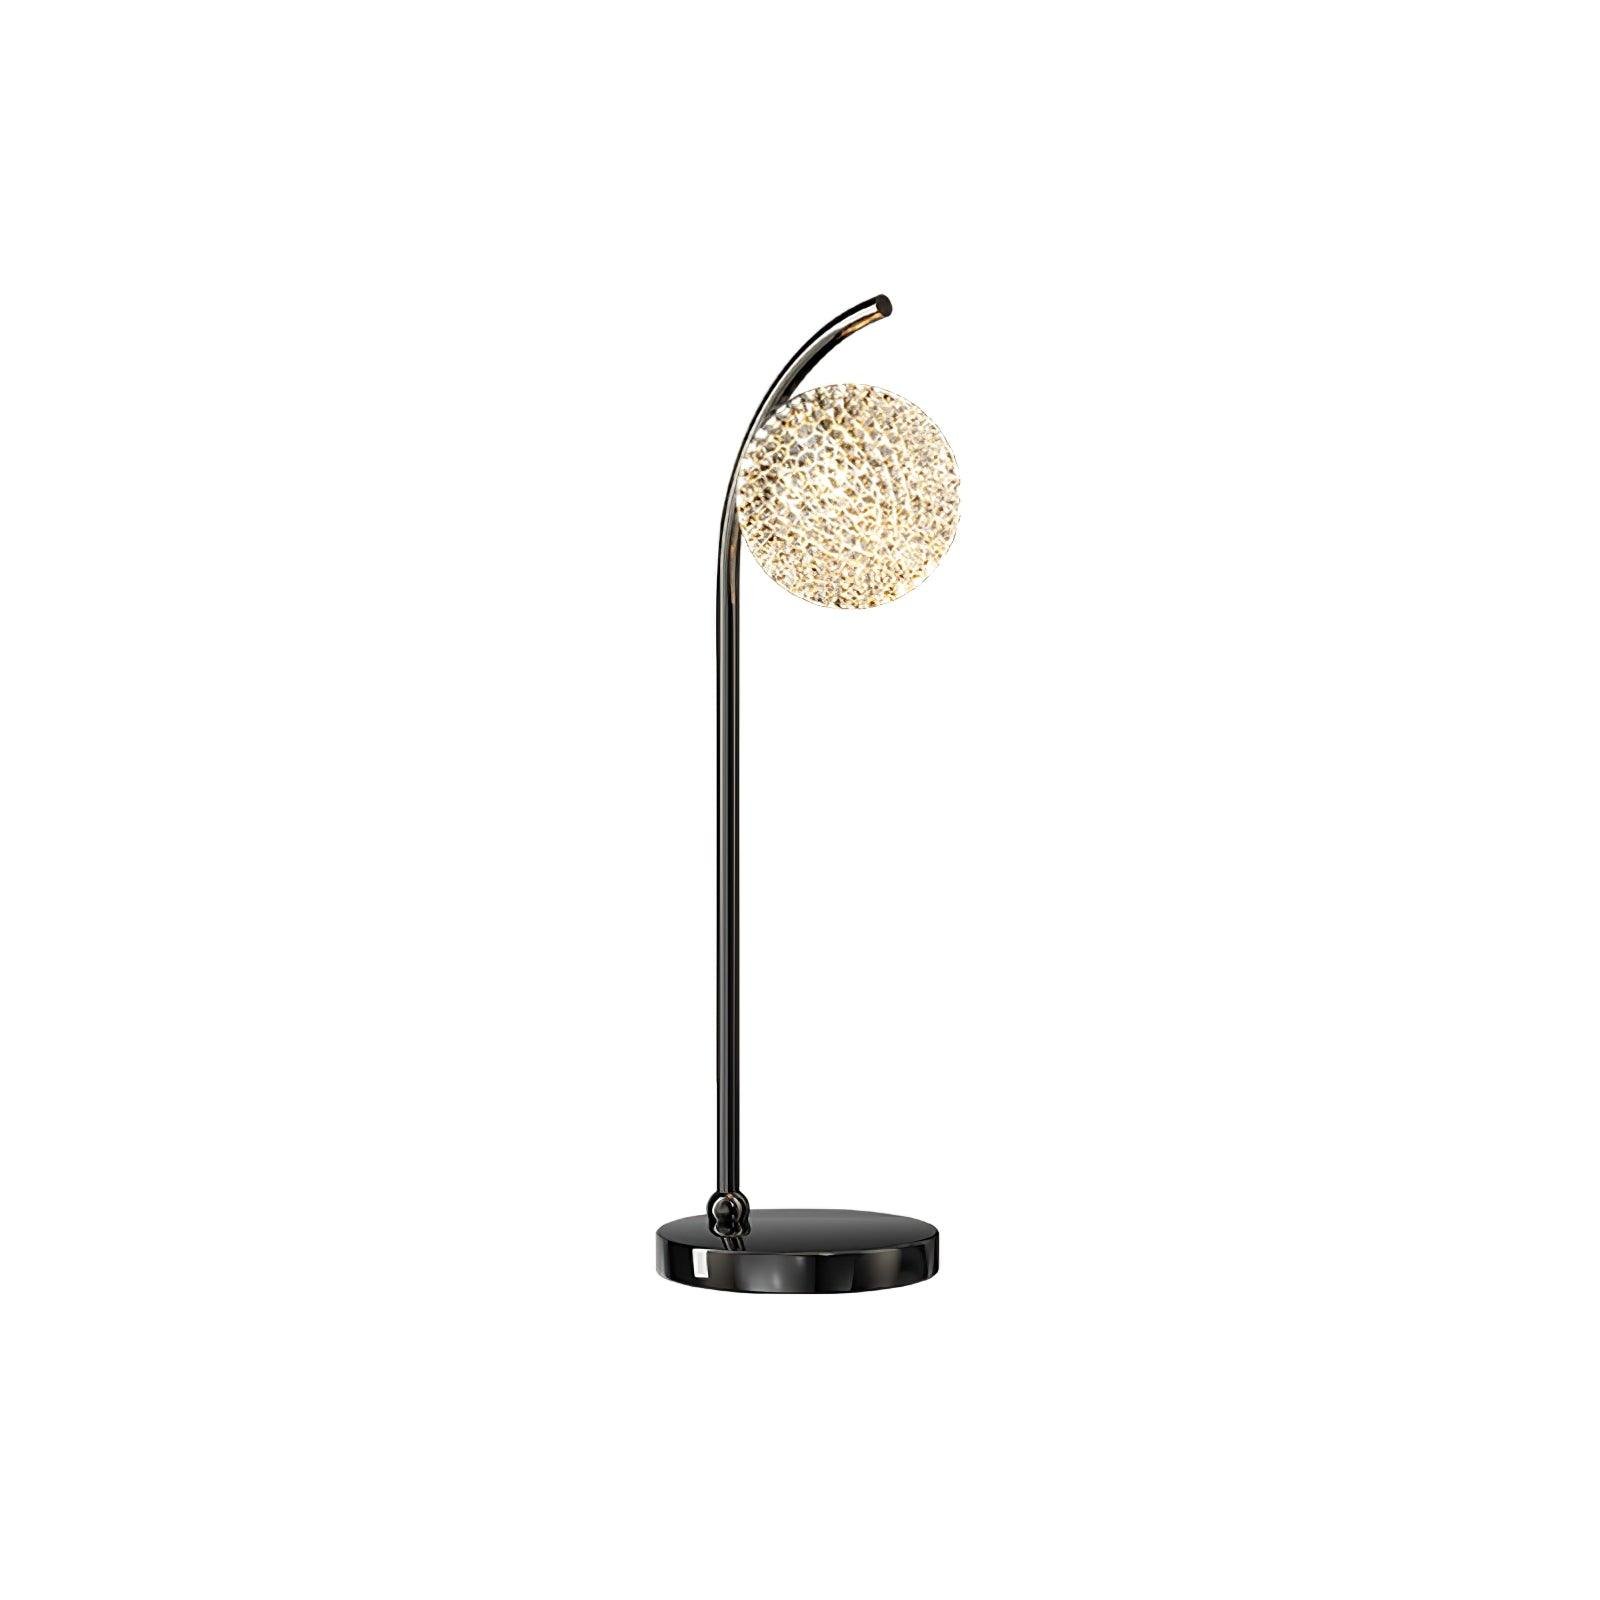 Black and Clear Crystal Table Lamp with a UK Plug, Diameter 14cm and Height 48cm; 5.5" in Diameter and 18.9" in Height